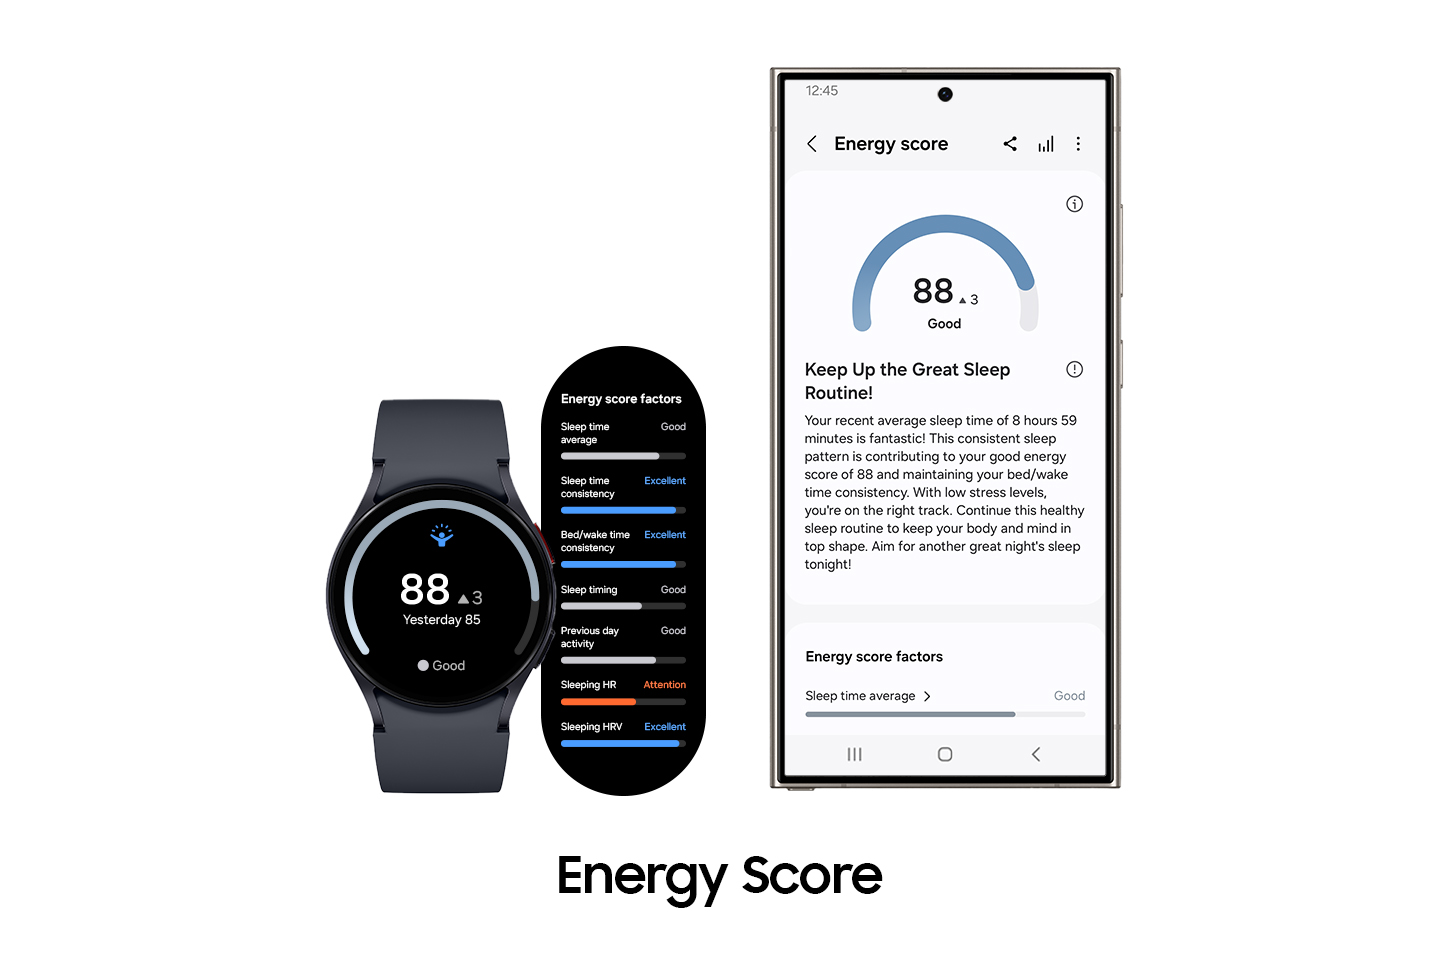 One UI update brings more AI health features to Samsung Galaxy Watch